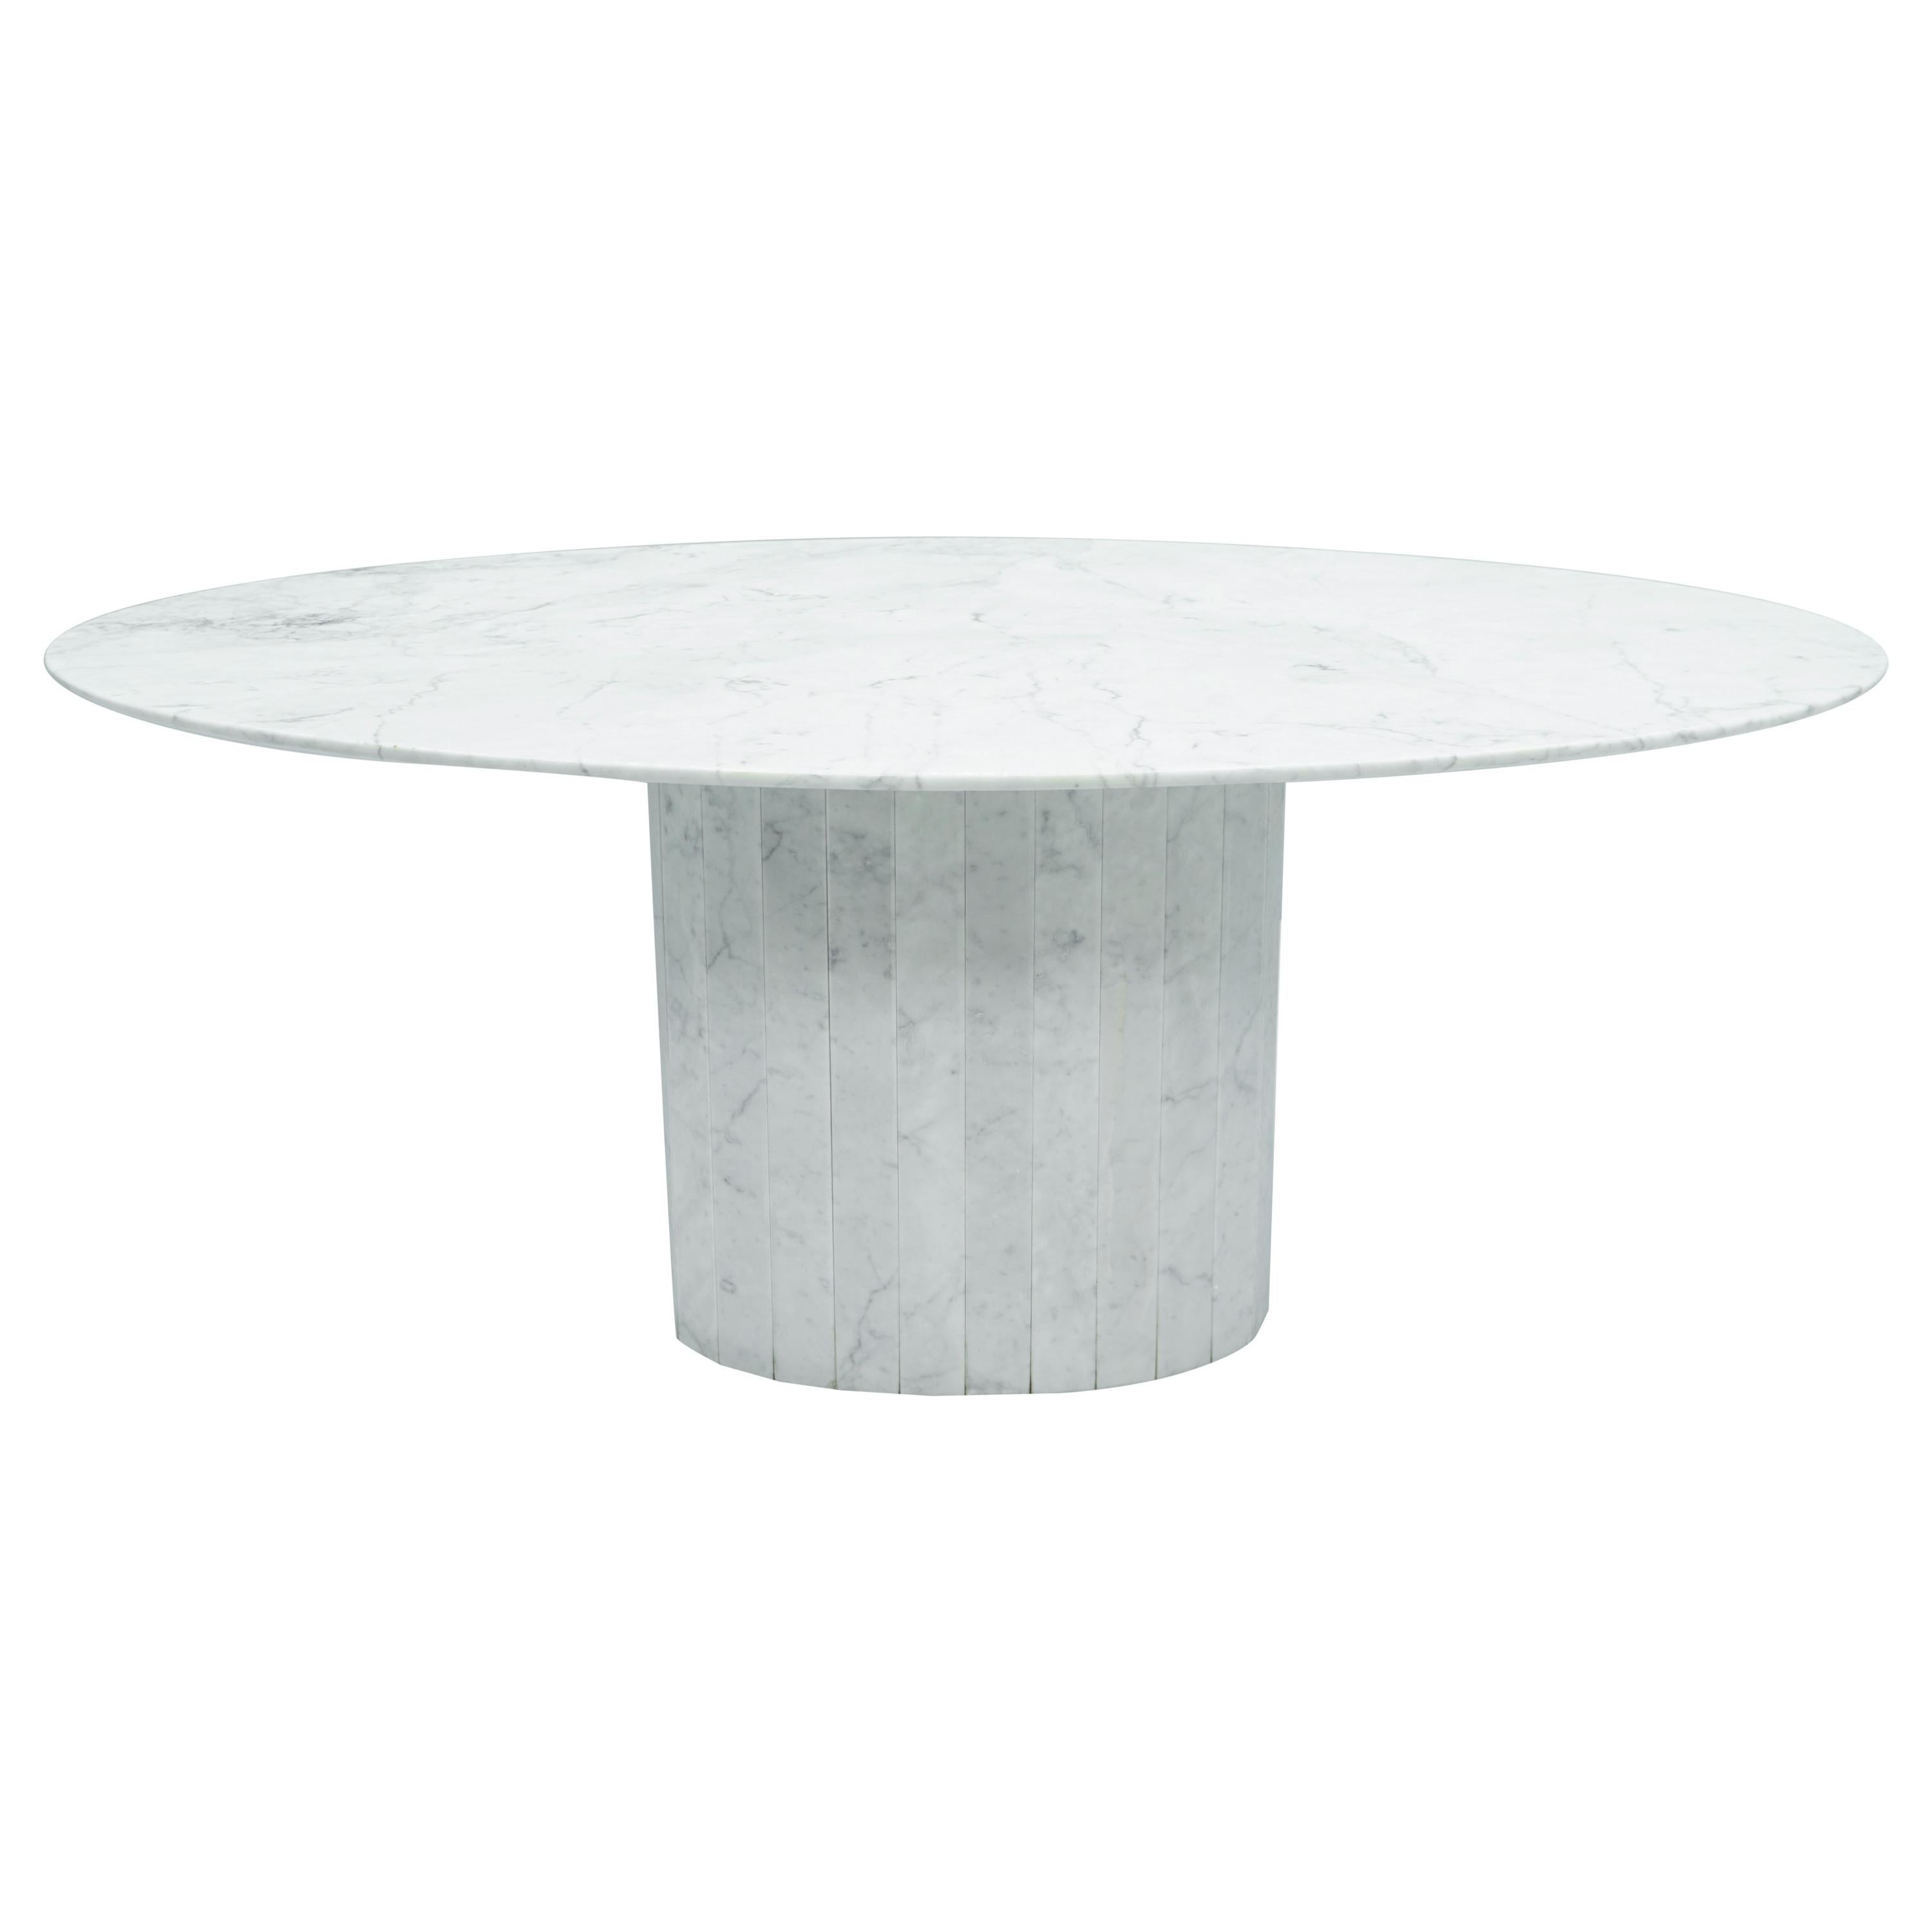 White Oval Carrara Marble Dining Table, 1970s For Sale